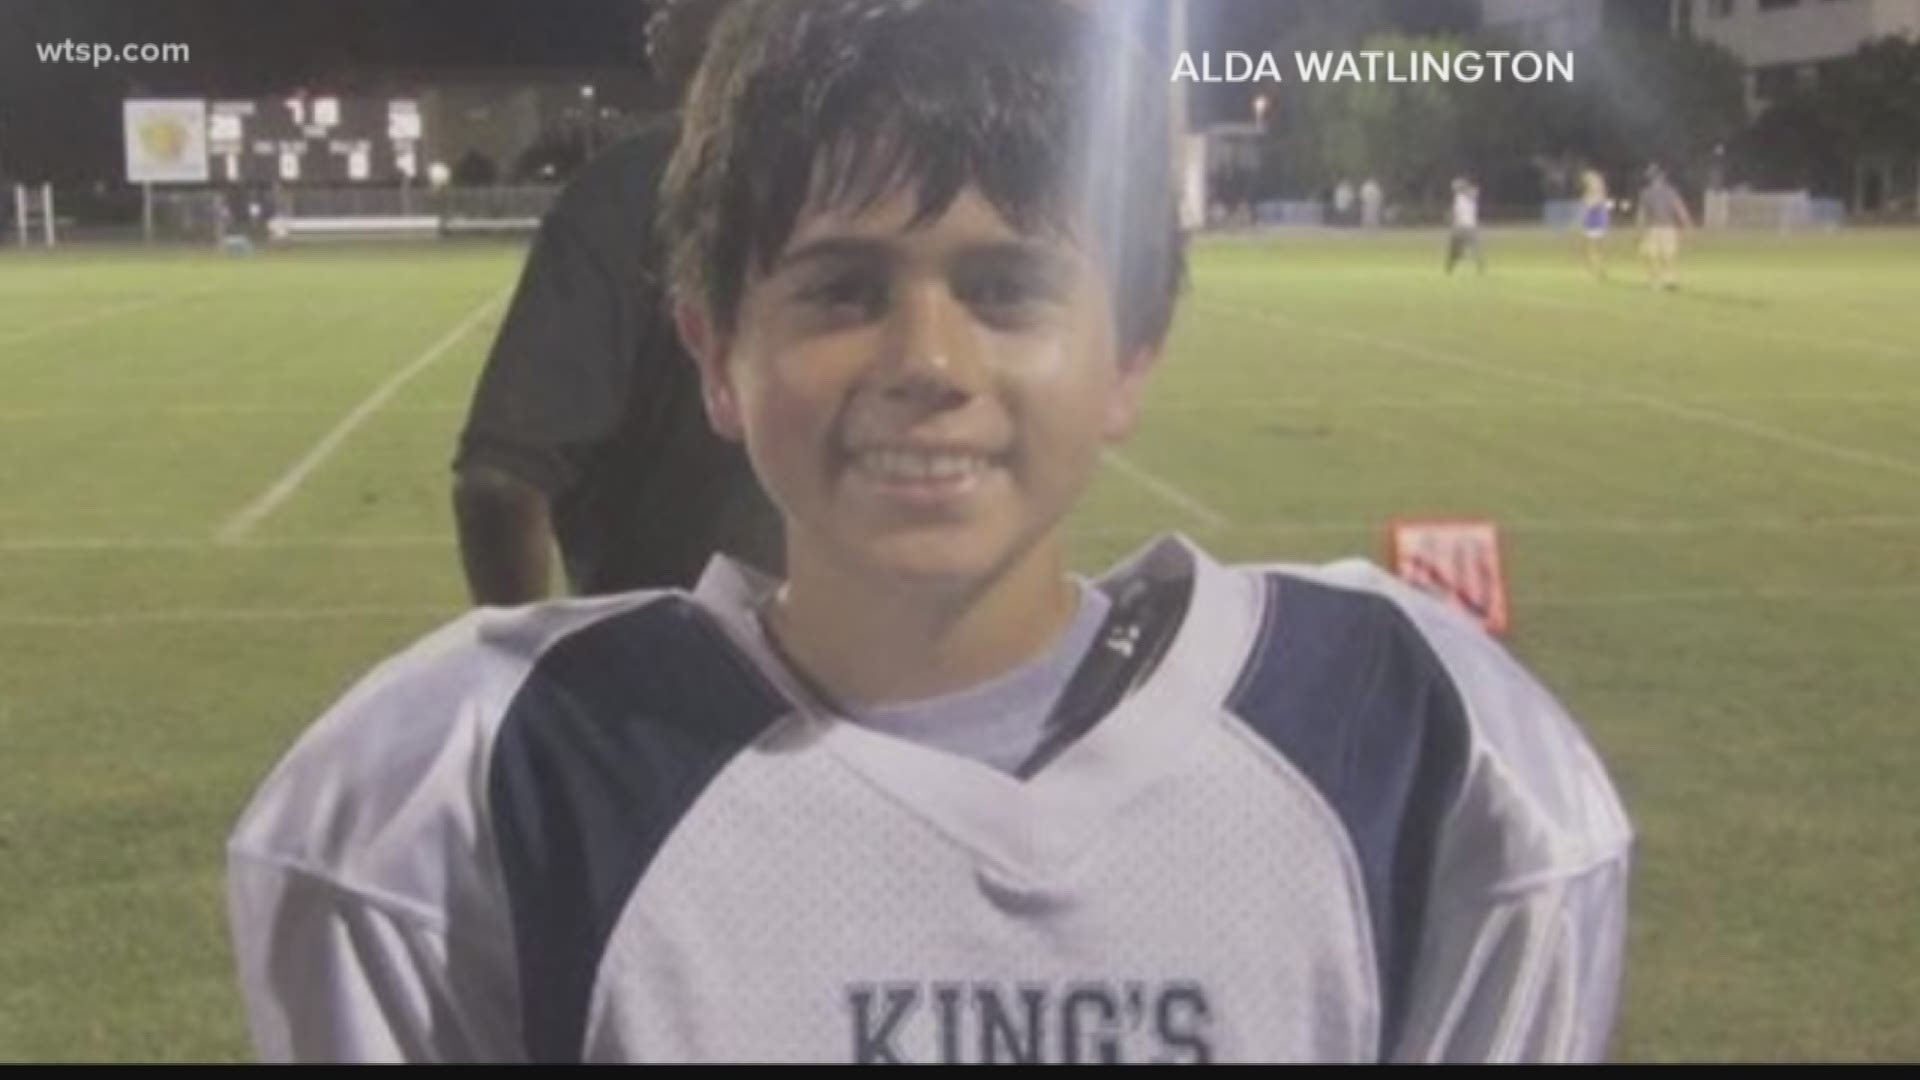 Jesse Watlington, 11, was killed in 2012 when he was struck by lightning during football practice at a school in Fort Myers. His parents Chuck and Alda went on a mission to help others. They found something called the WeatherBug lightning detection system. They now donate the system to schools around Florida in Jesse's memory.